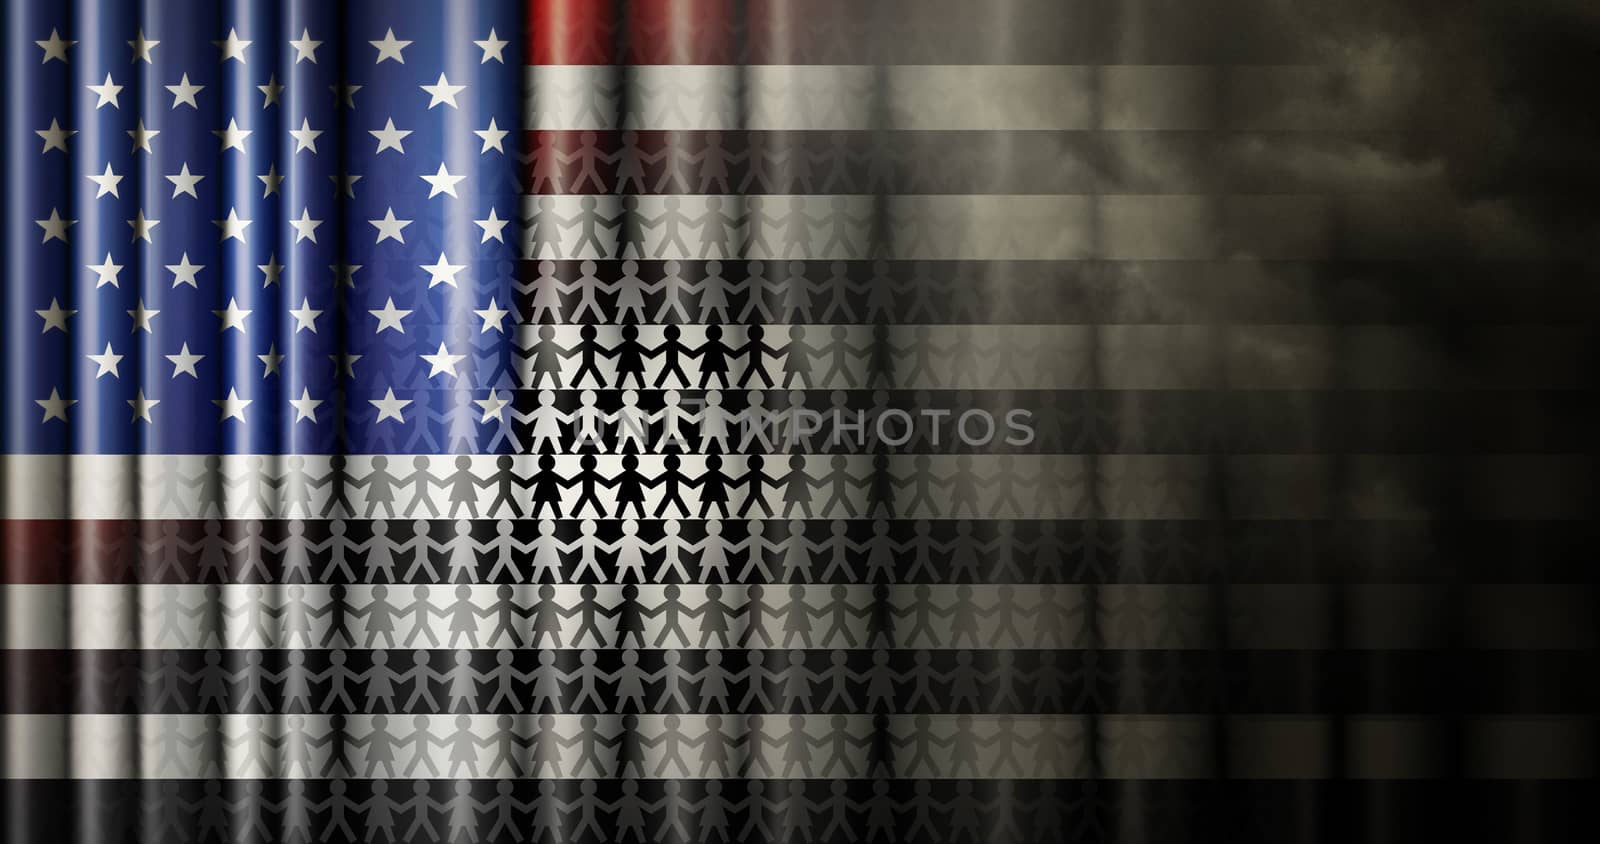 Illustration of the flag of the United States with the stripes changing to black and white, storm clouds, and symbols representing the black and white population.